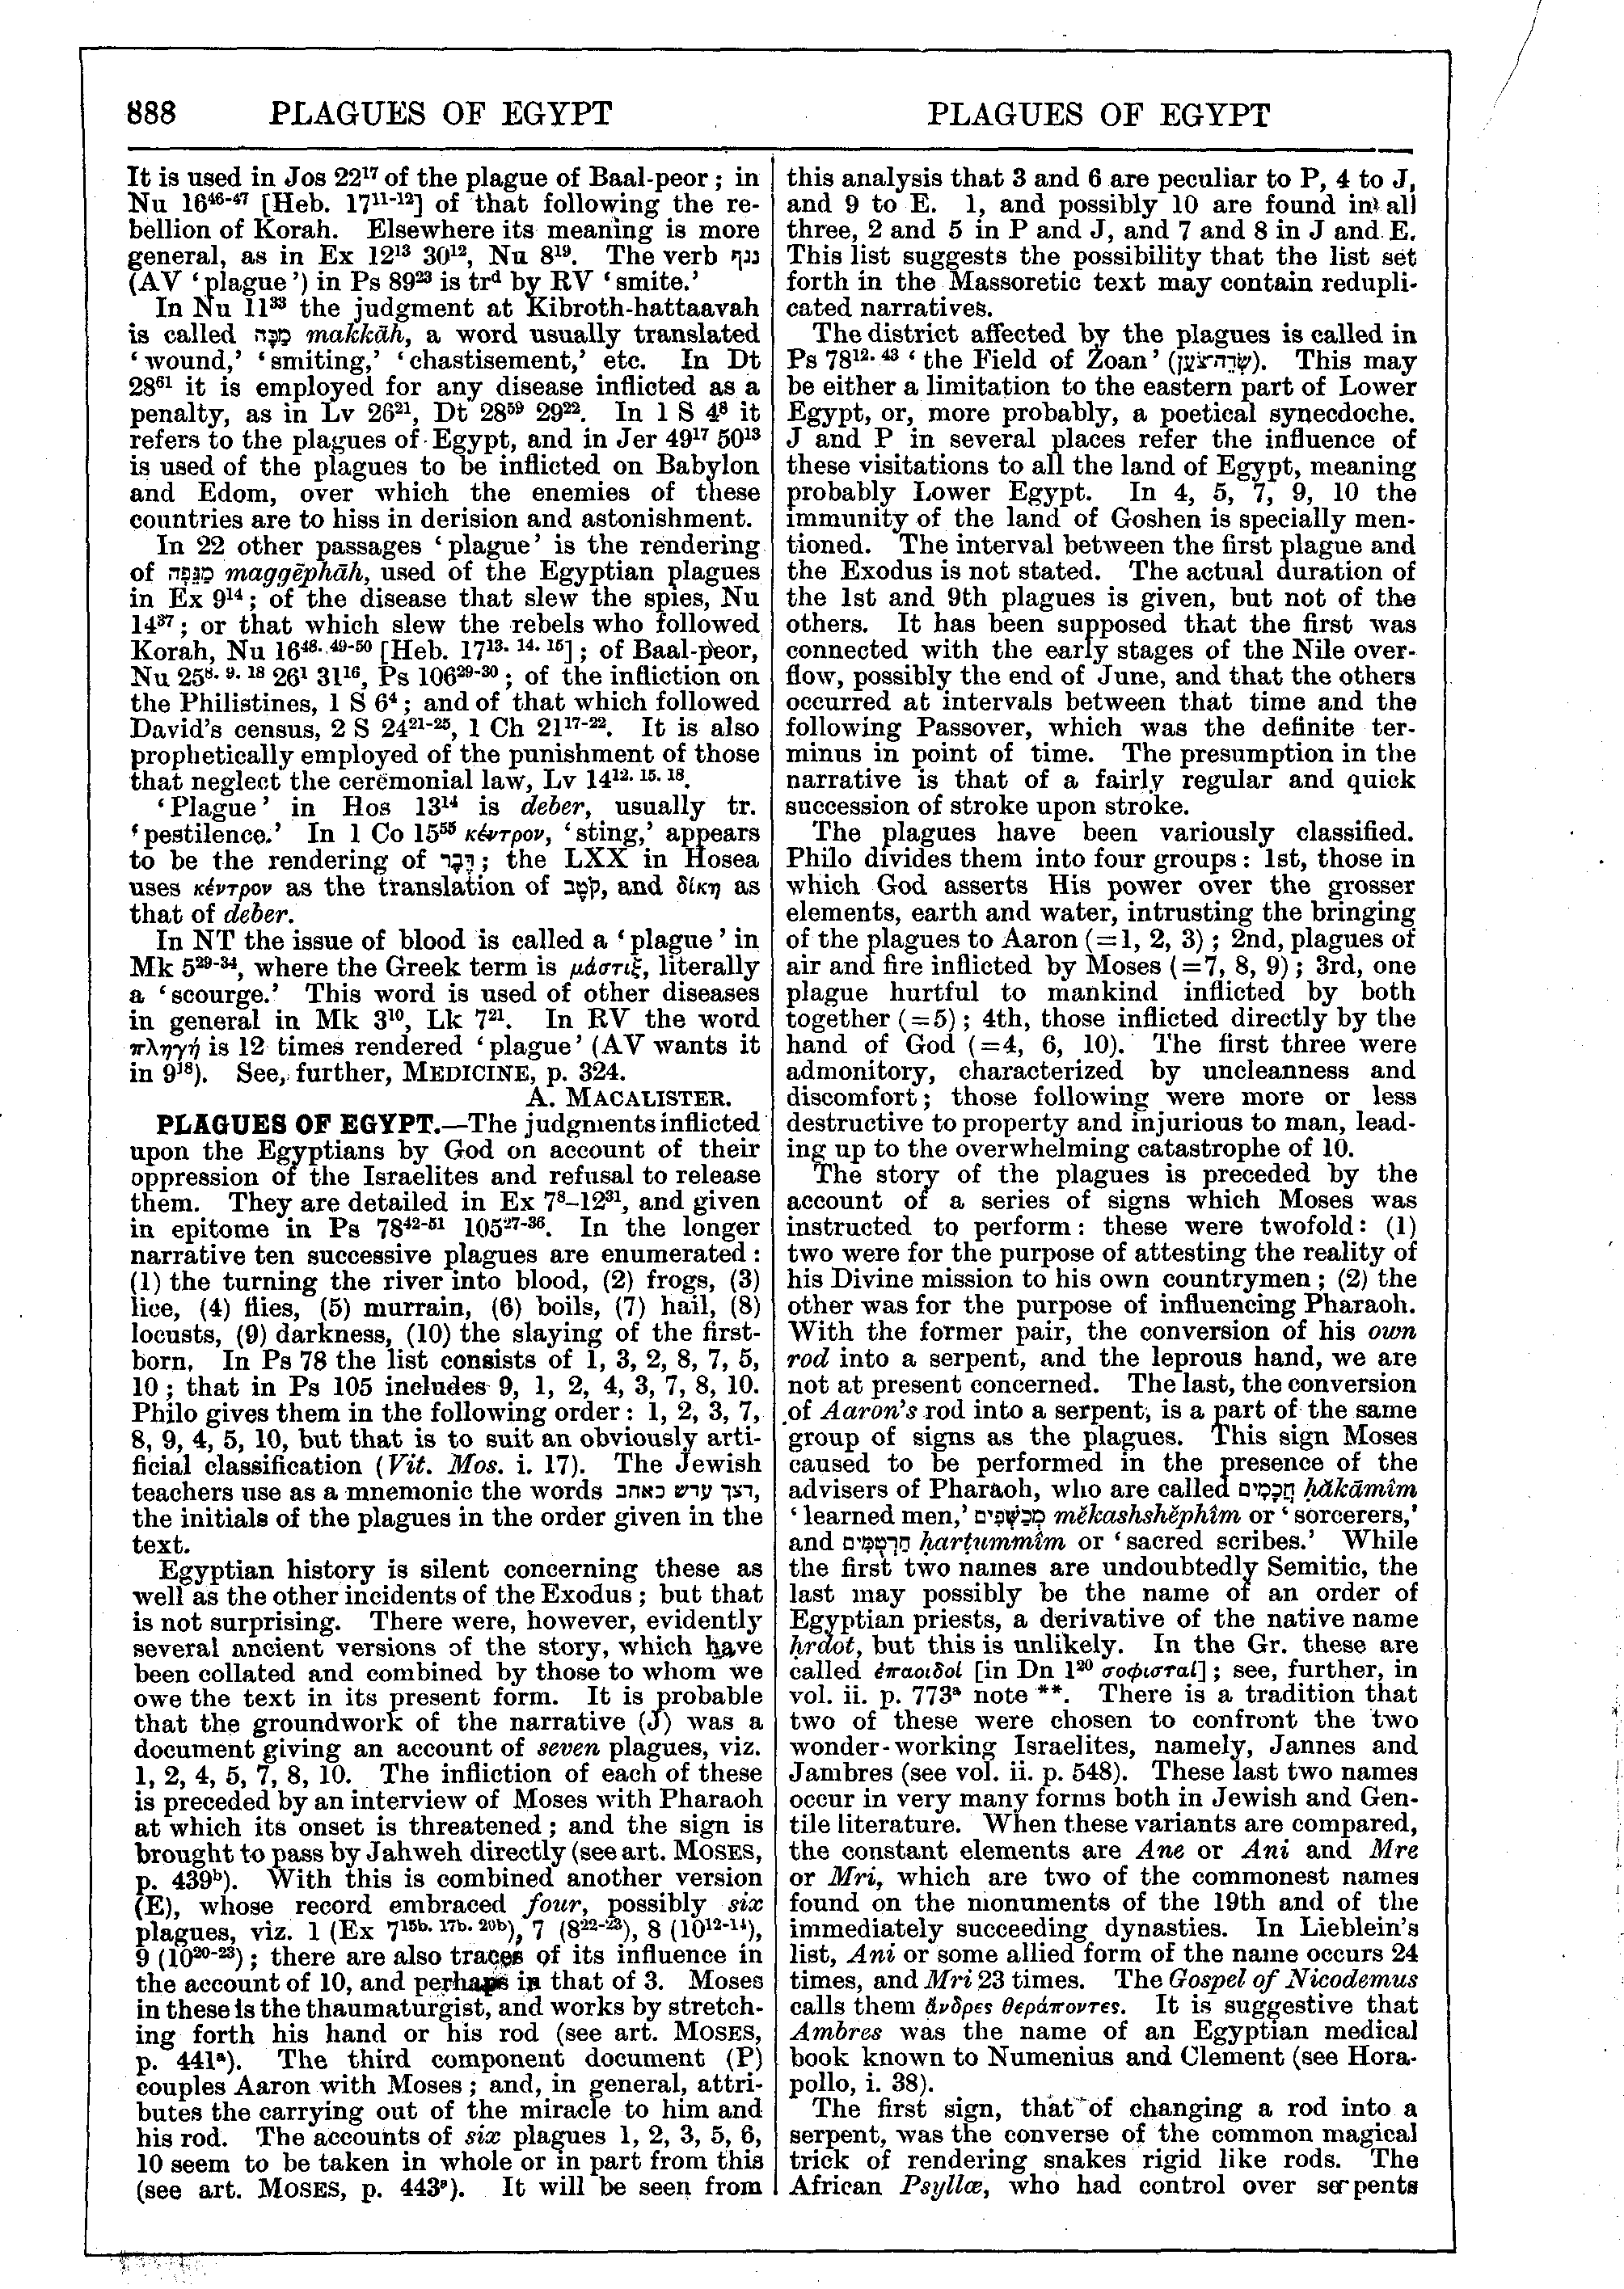 Image of page 888